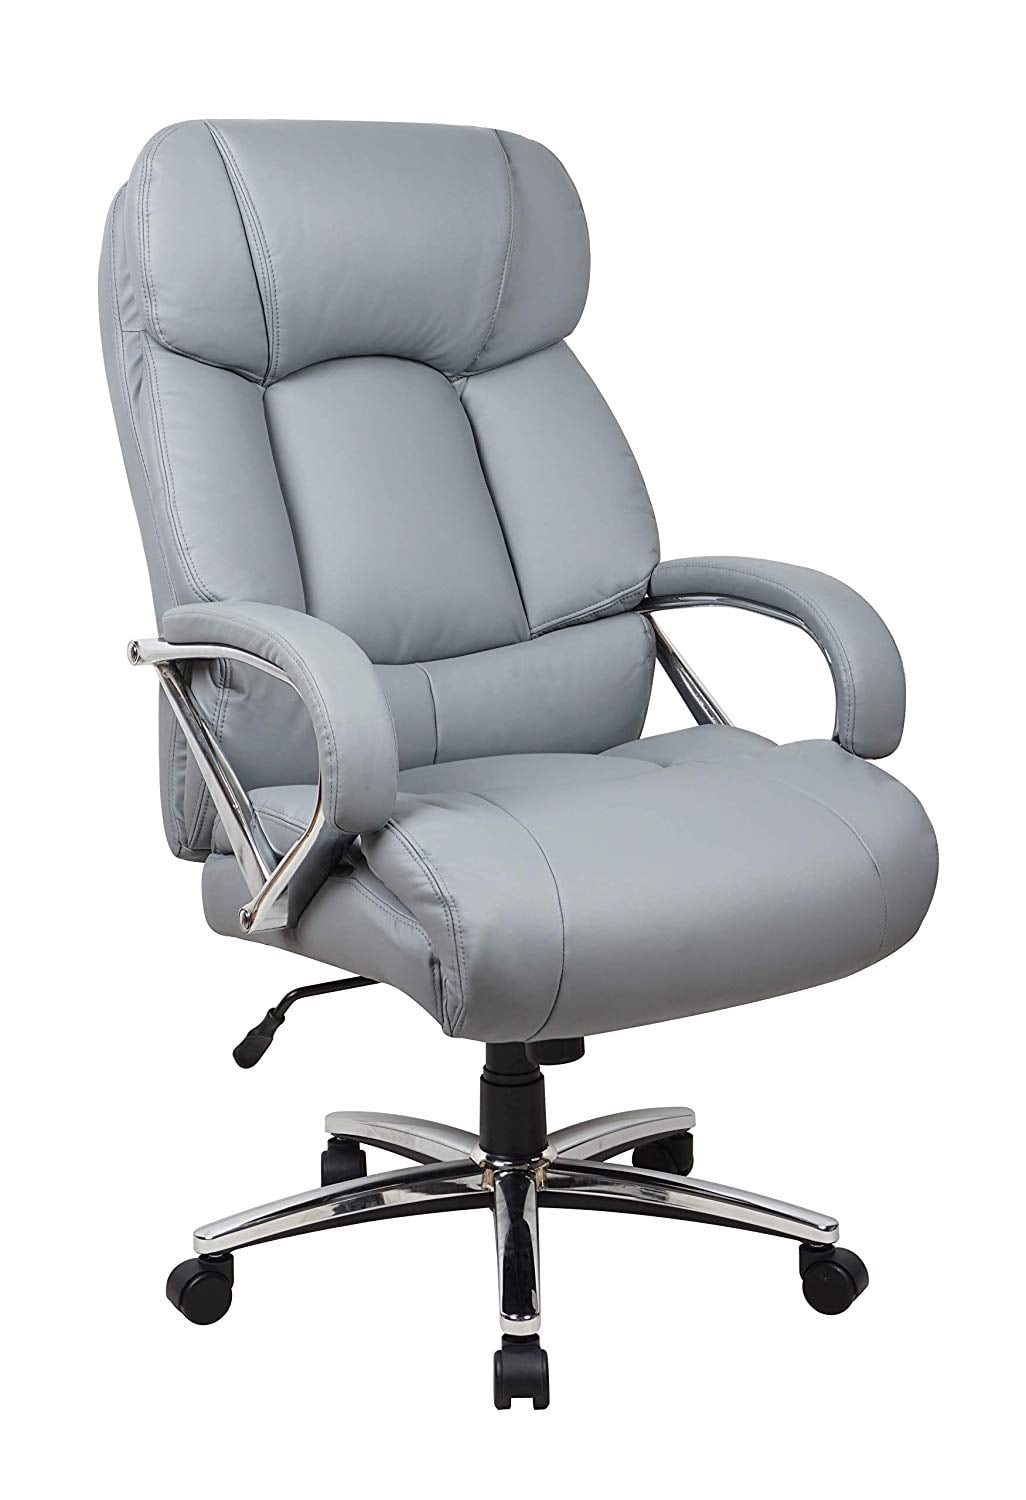 Tall Office Chair With Wheels | Chair Design